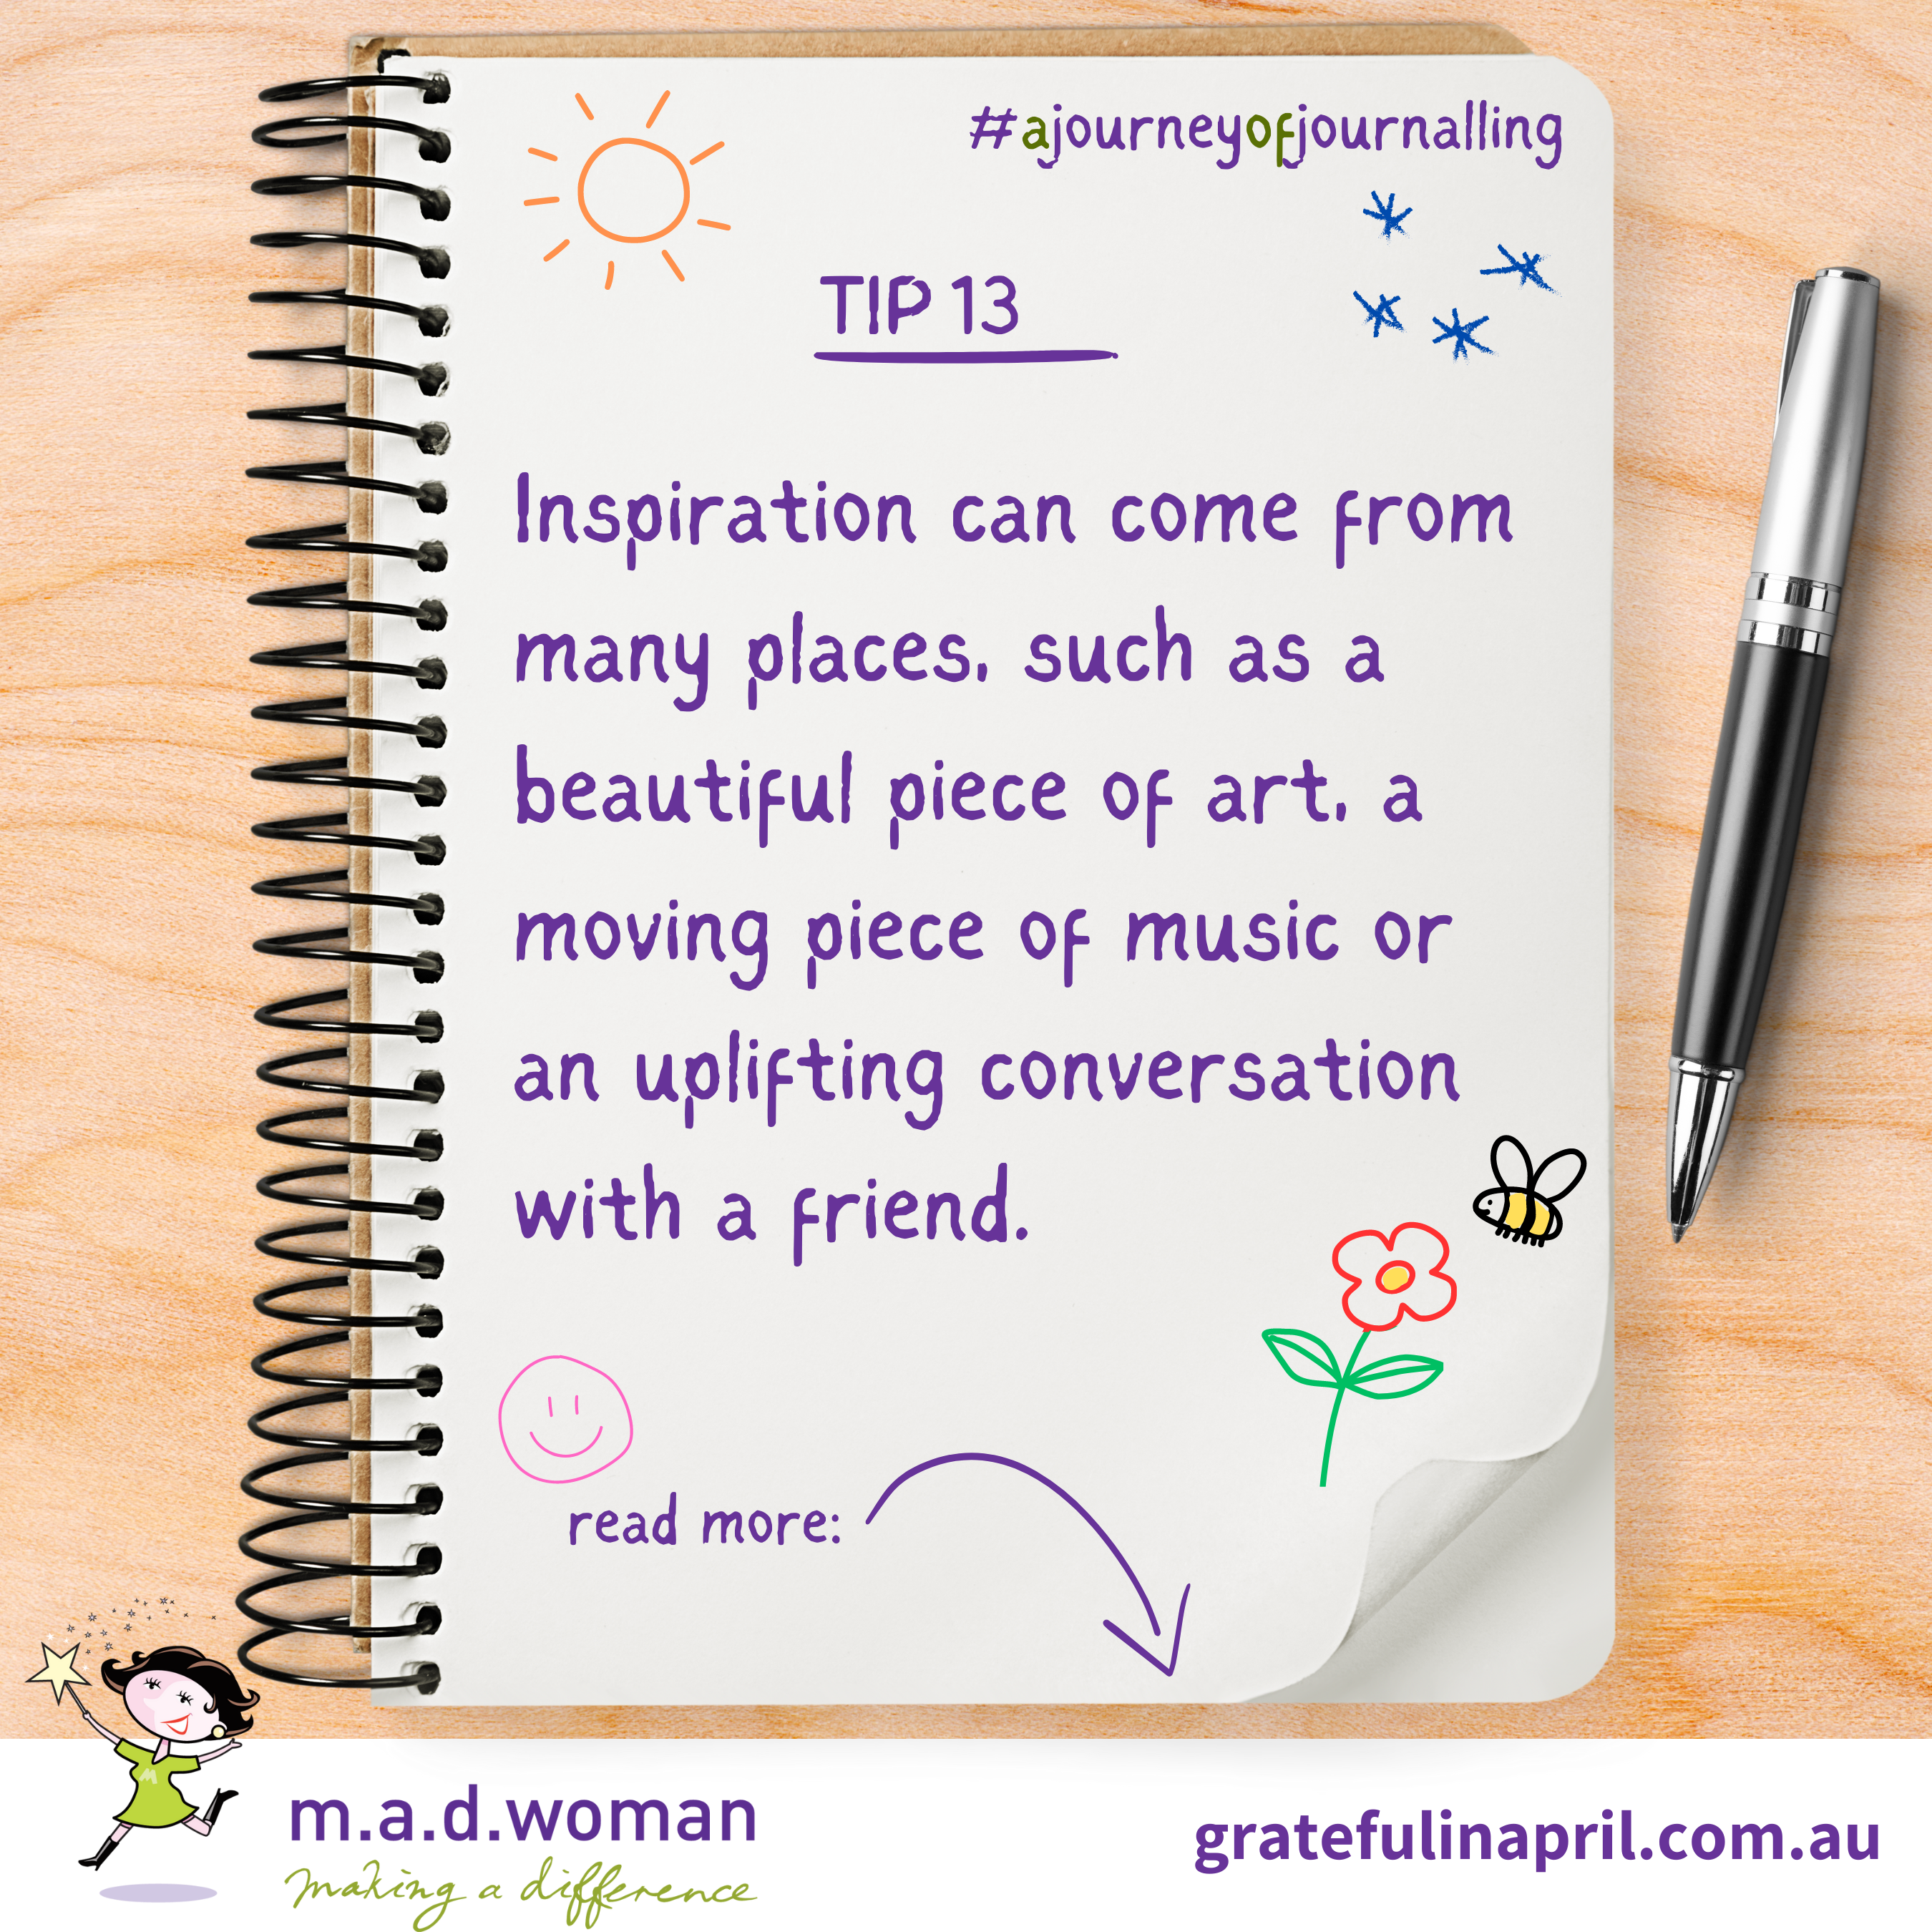 Tip 13 - a journey of journalling